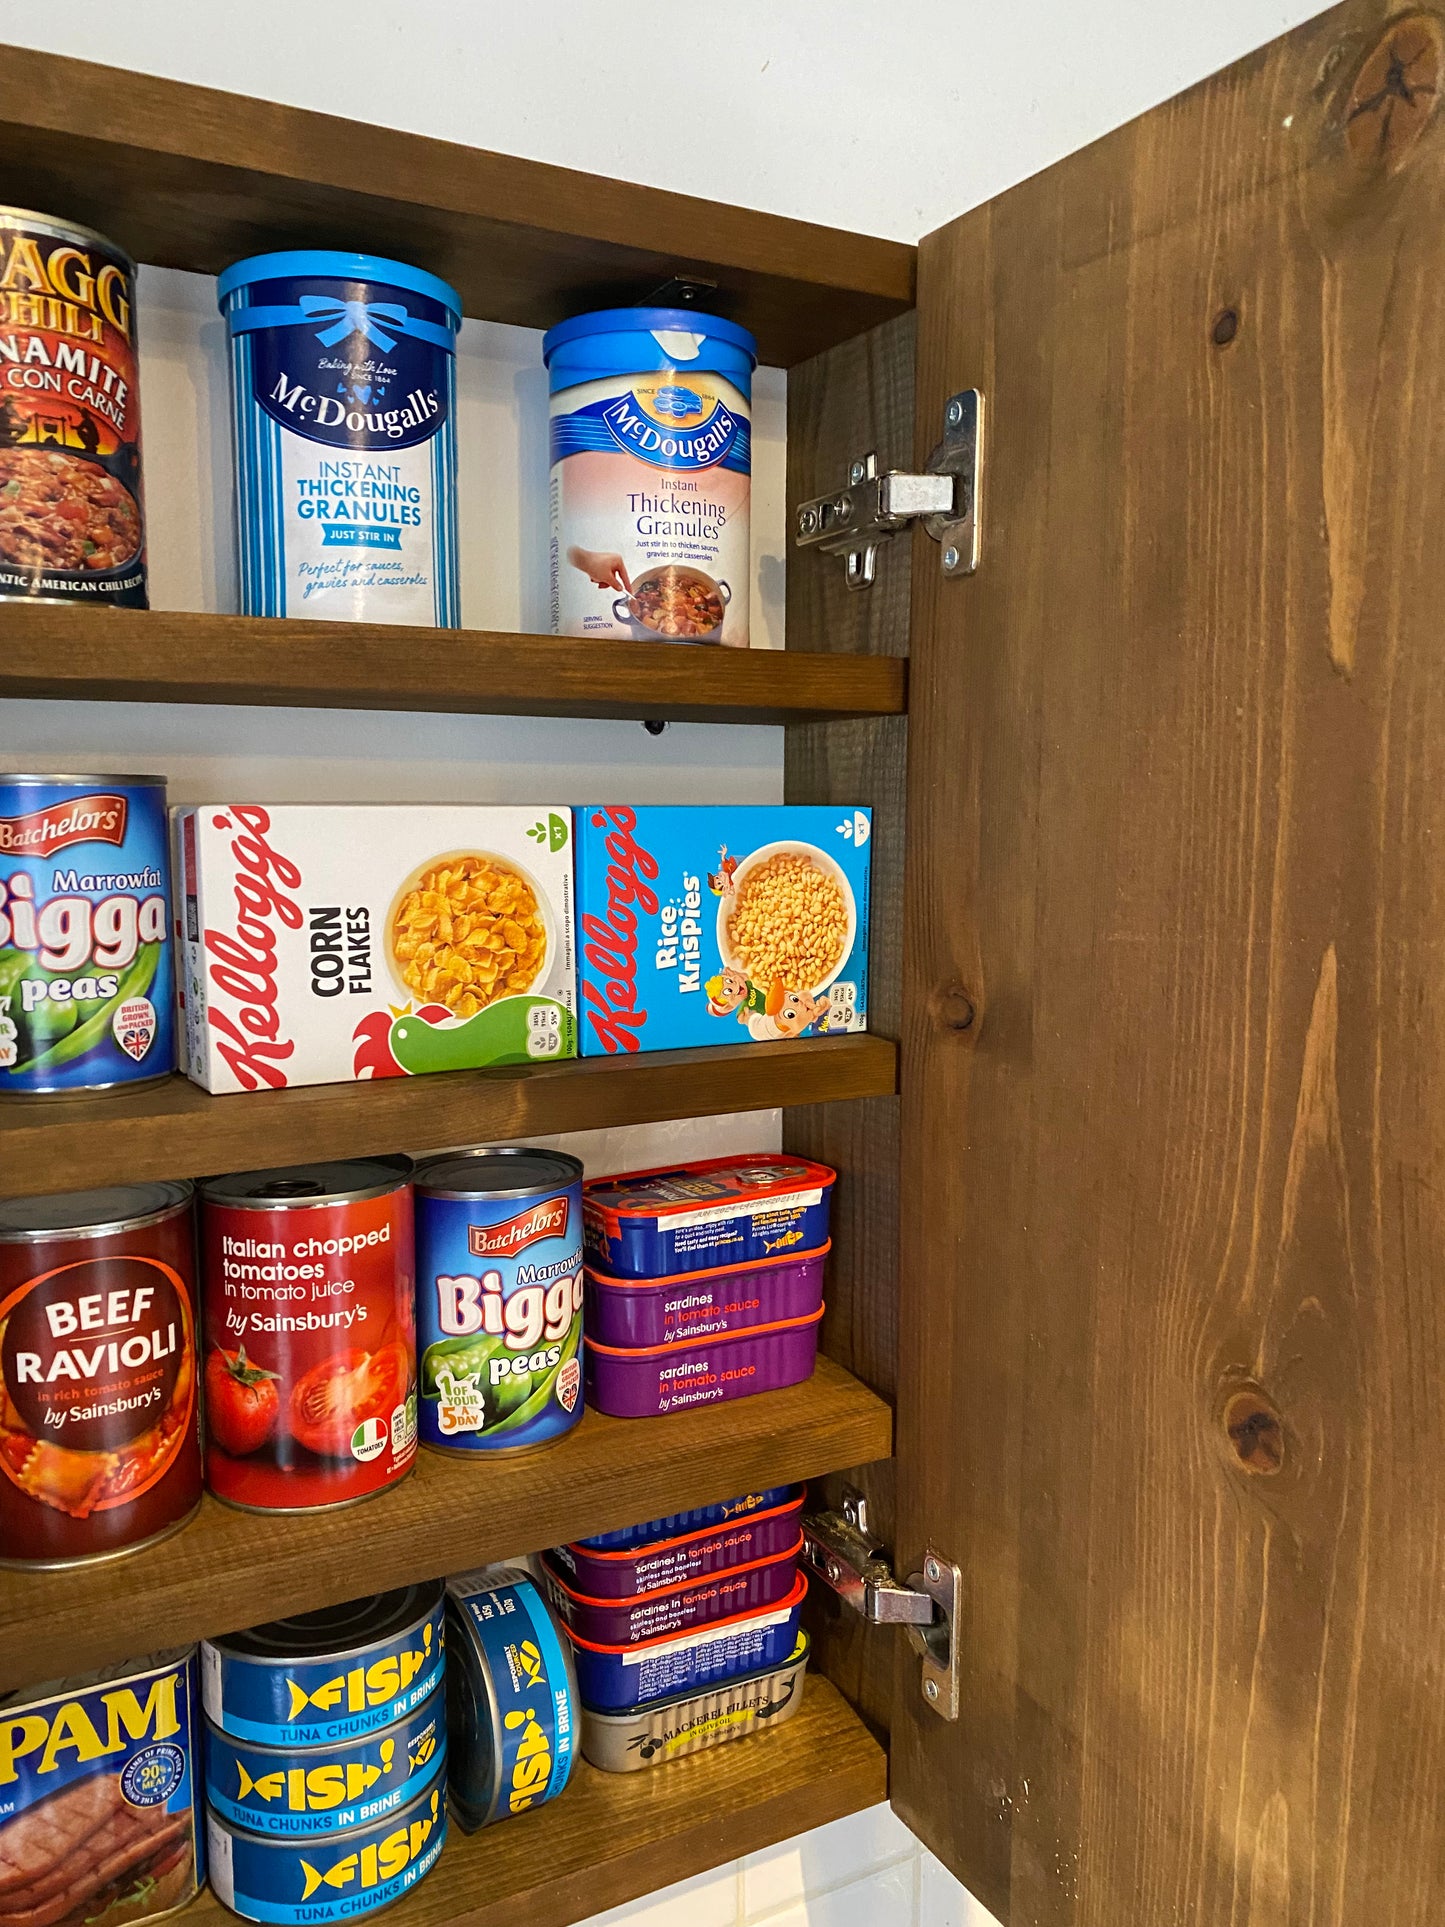 Introducing Our Versatile Can Cupboard – Space-Saving Solution for Kitchen or Pantry!